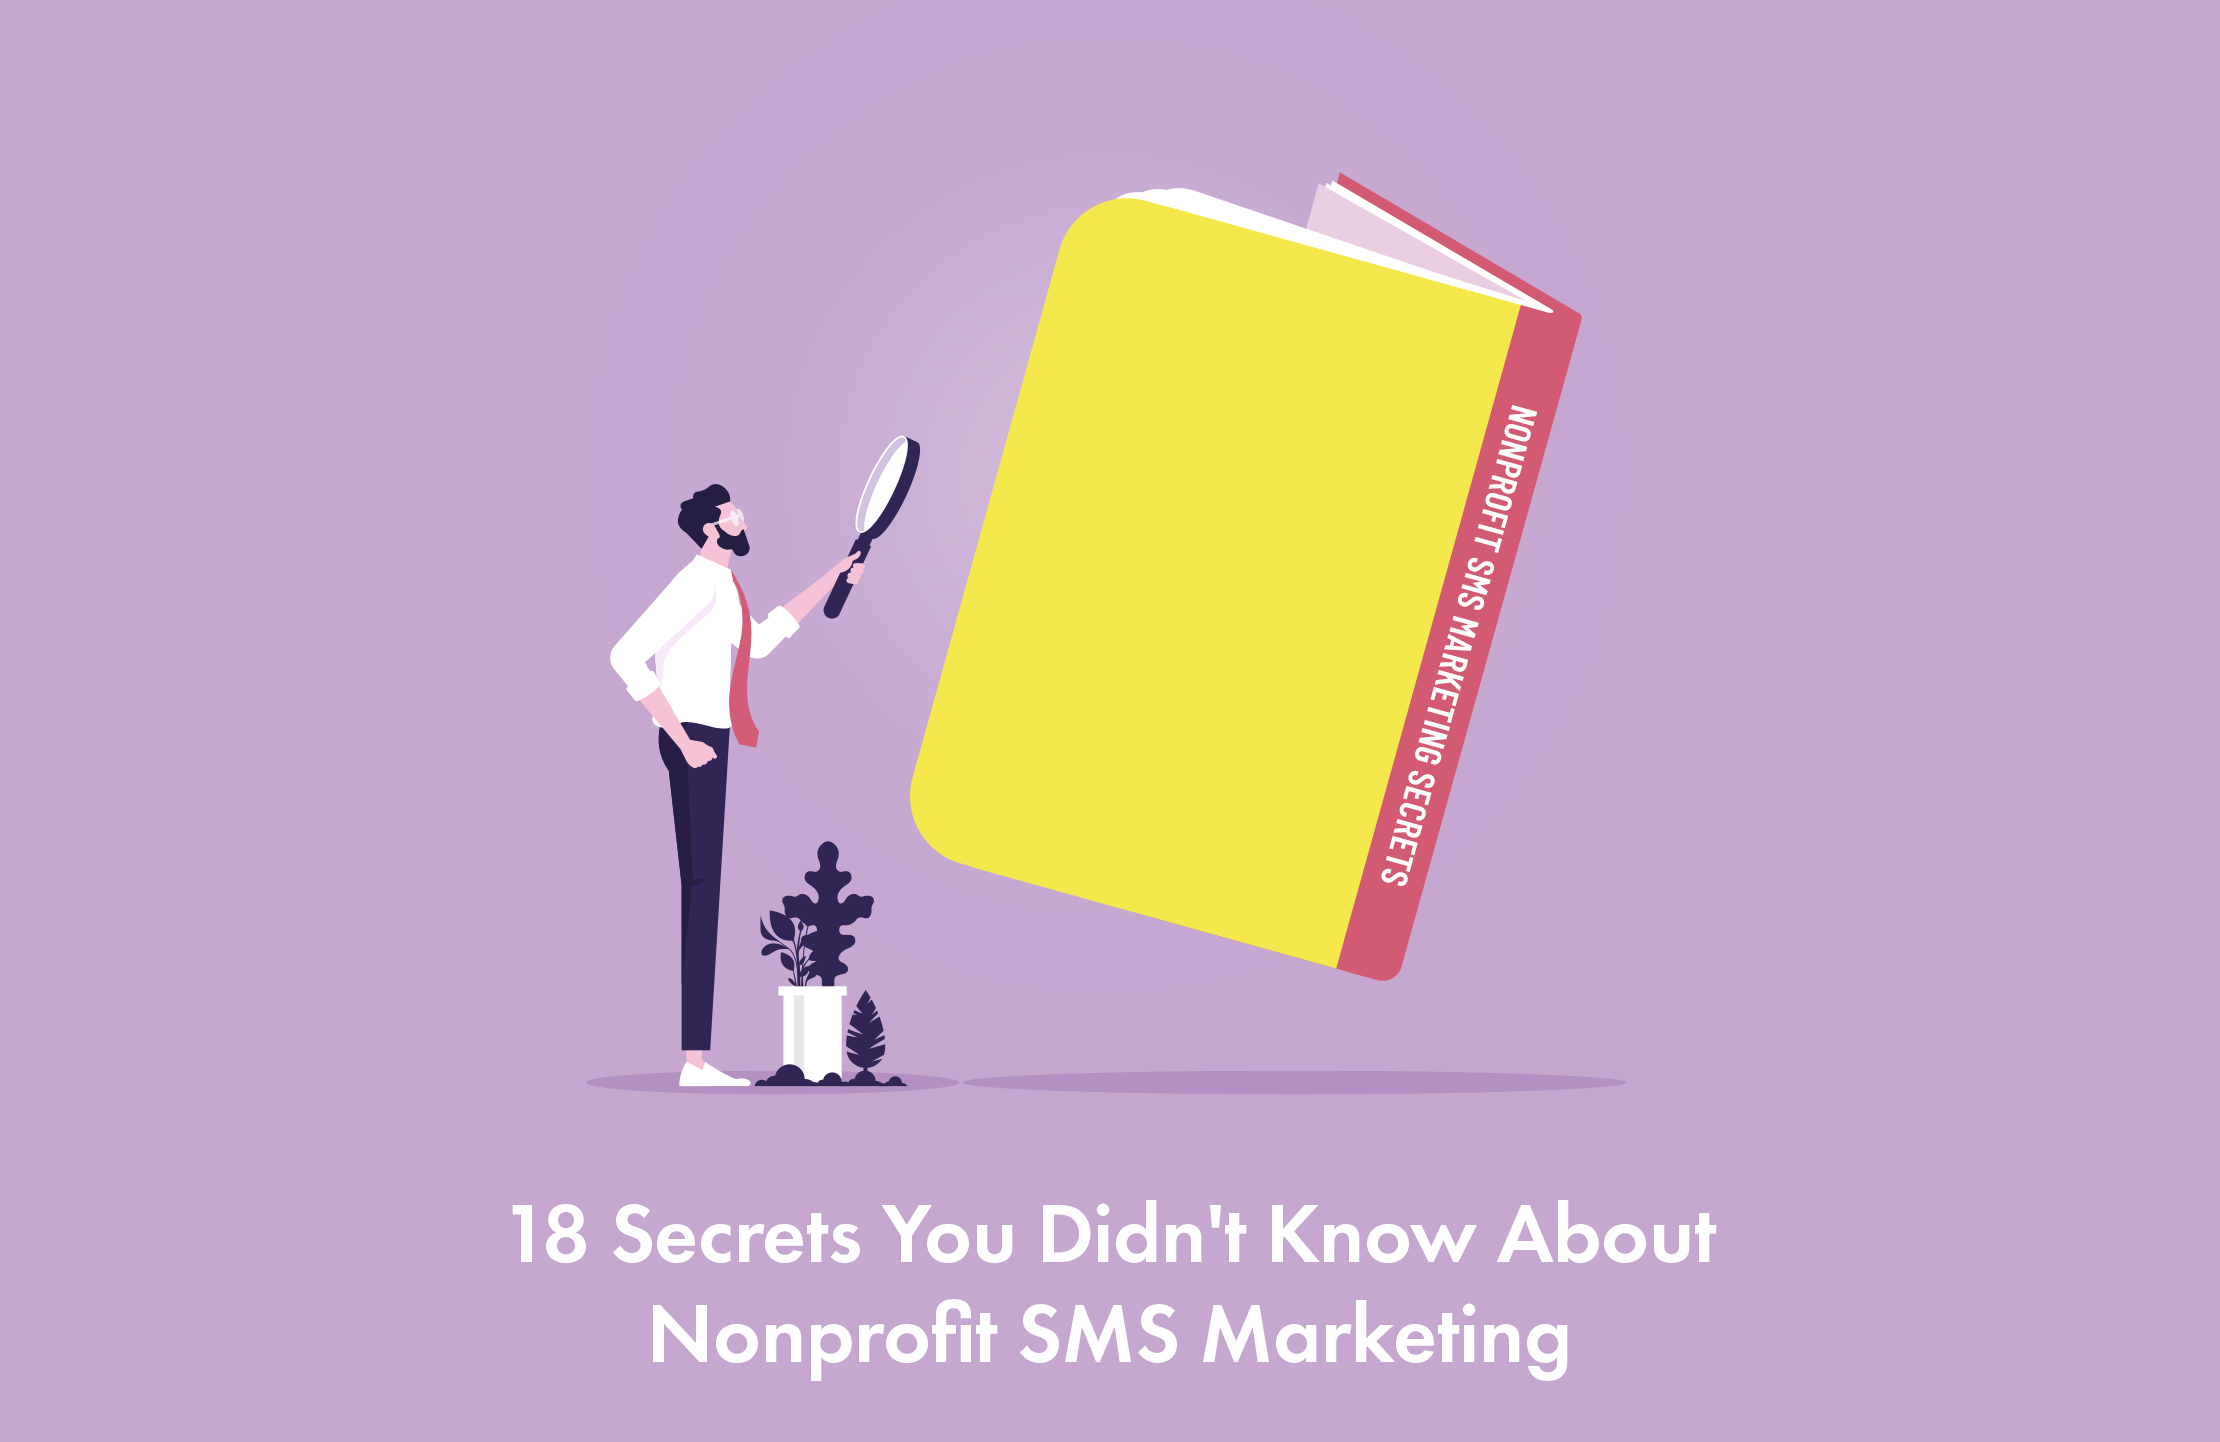 18 Secrets You Didn't Know About Nonprofit SMS Marketing